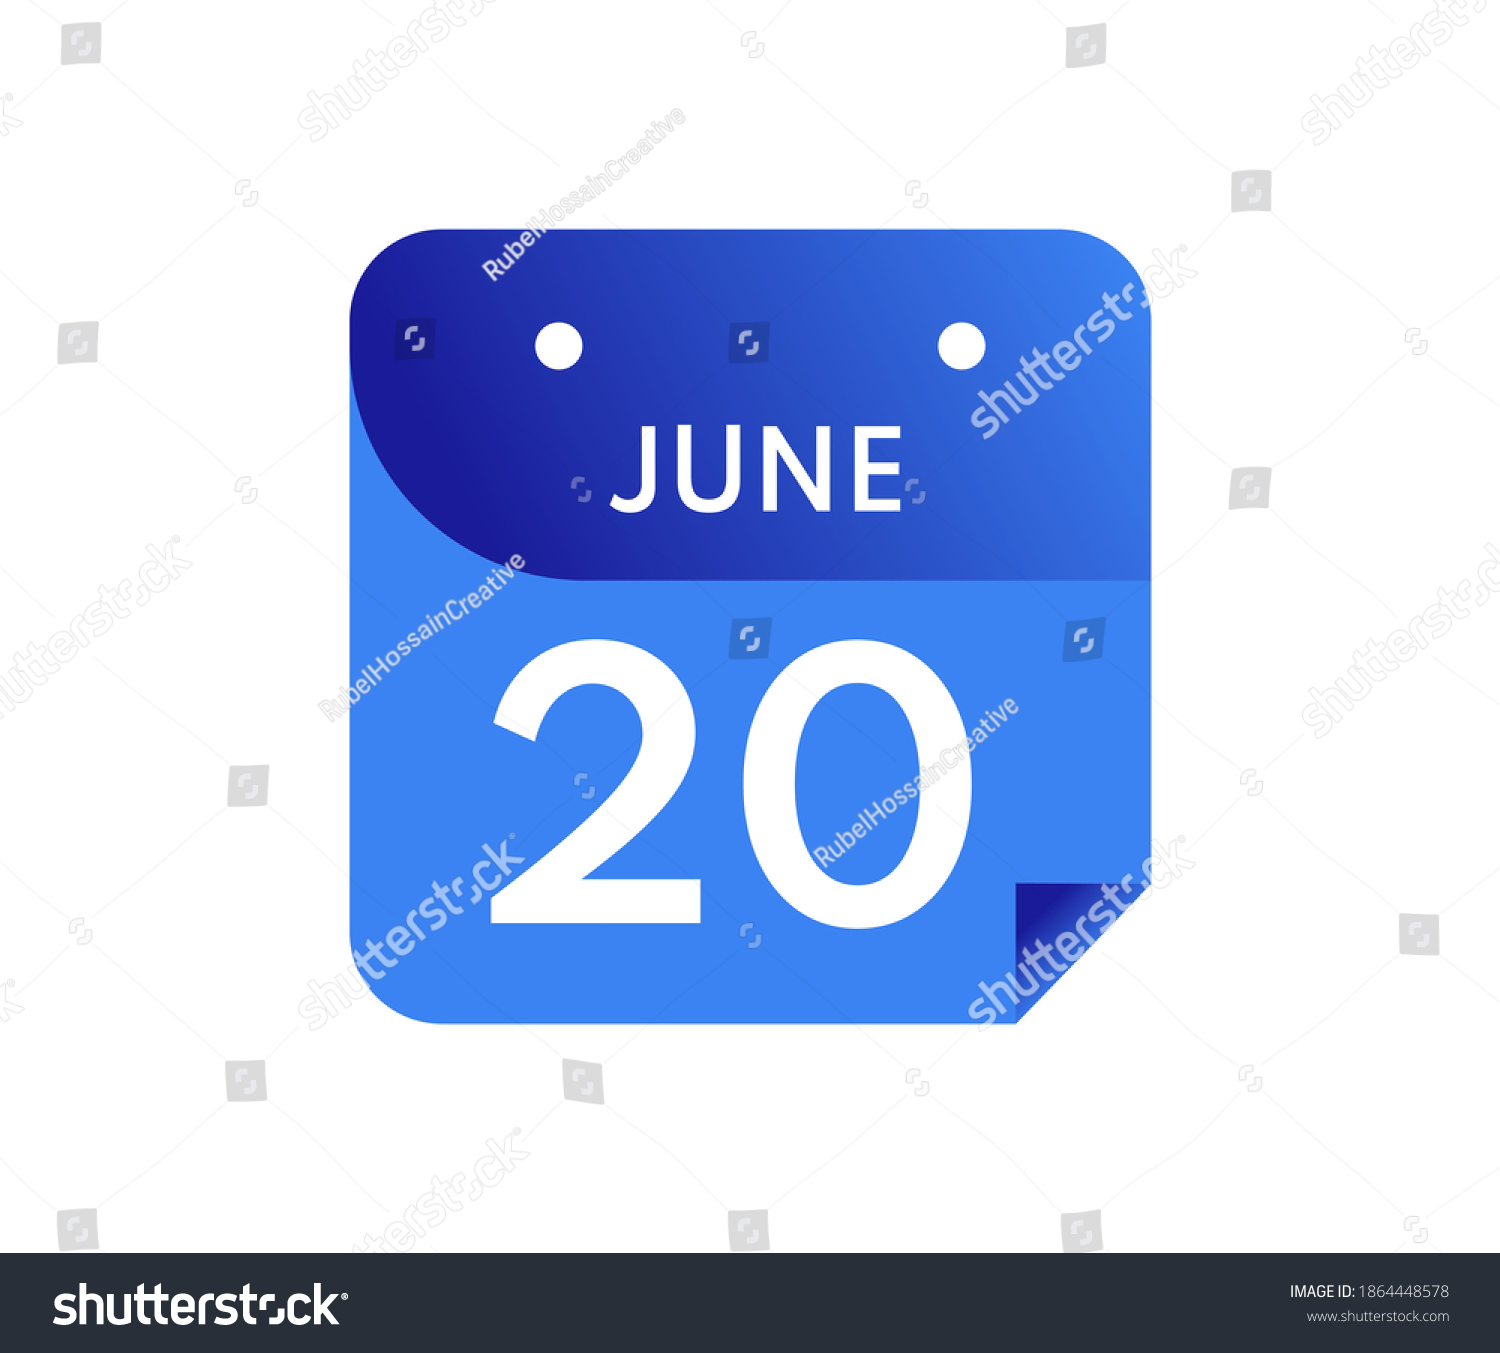 June 20 Date on a Single Day Calendar in Flat Royalty Free Stock